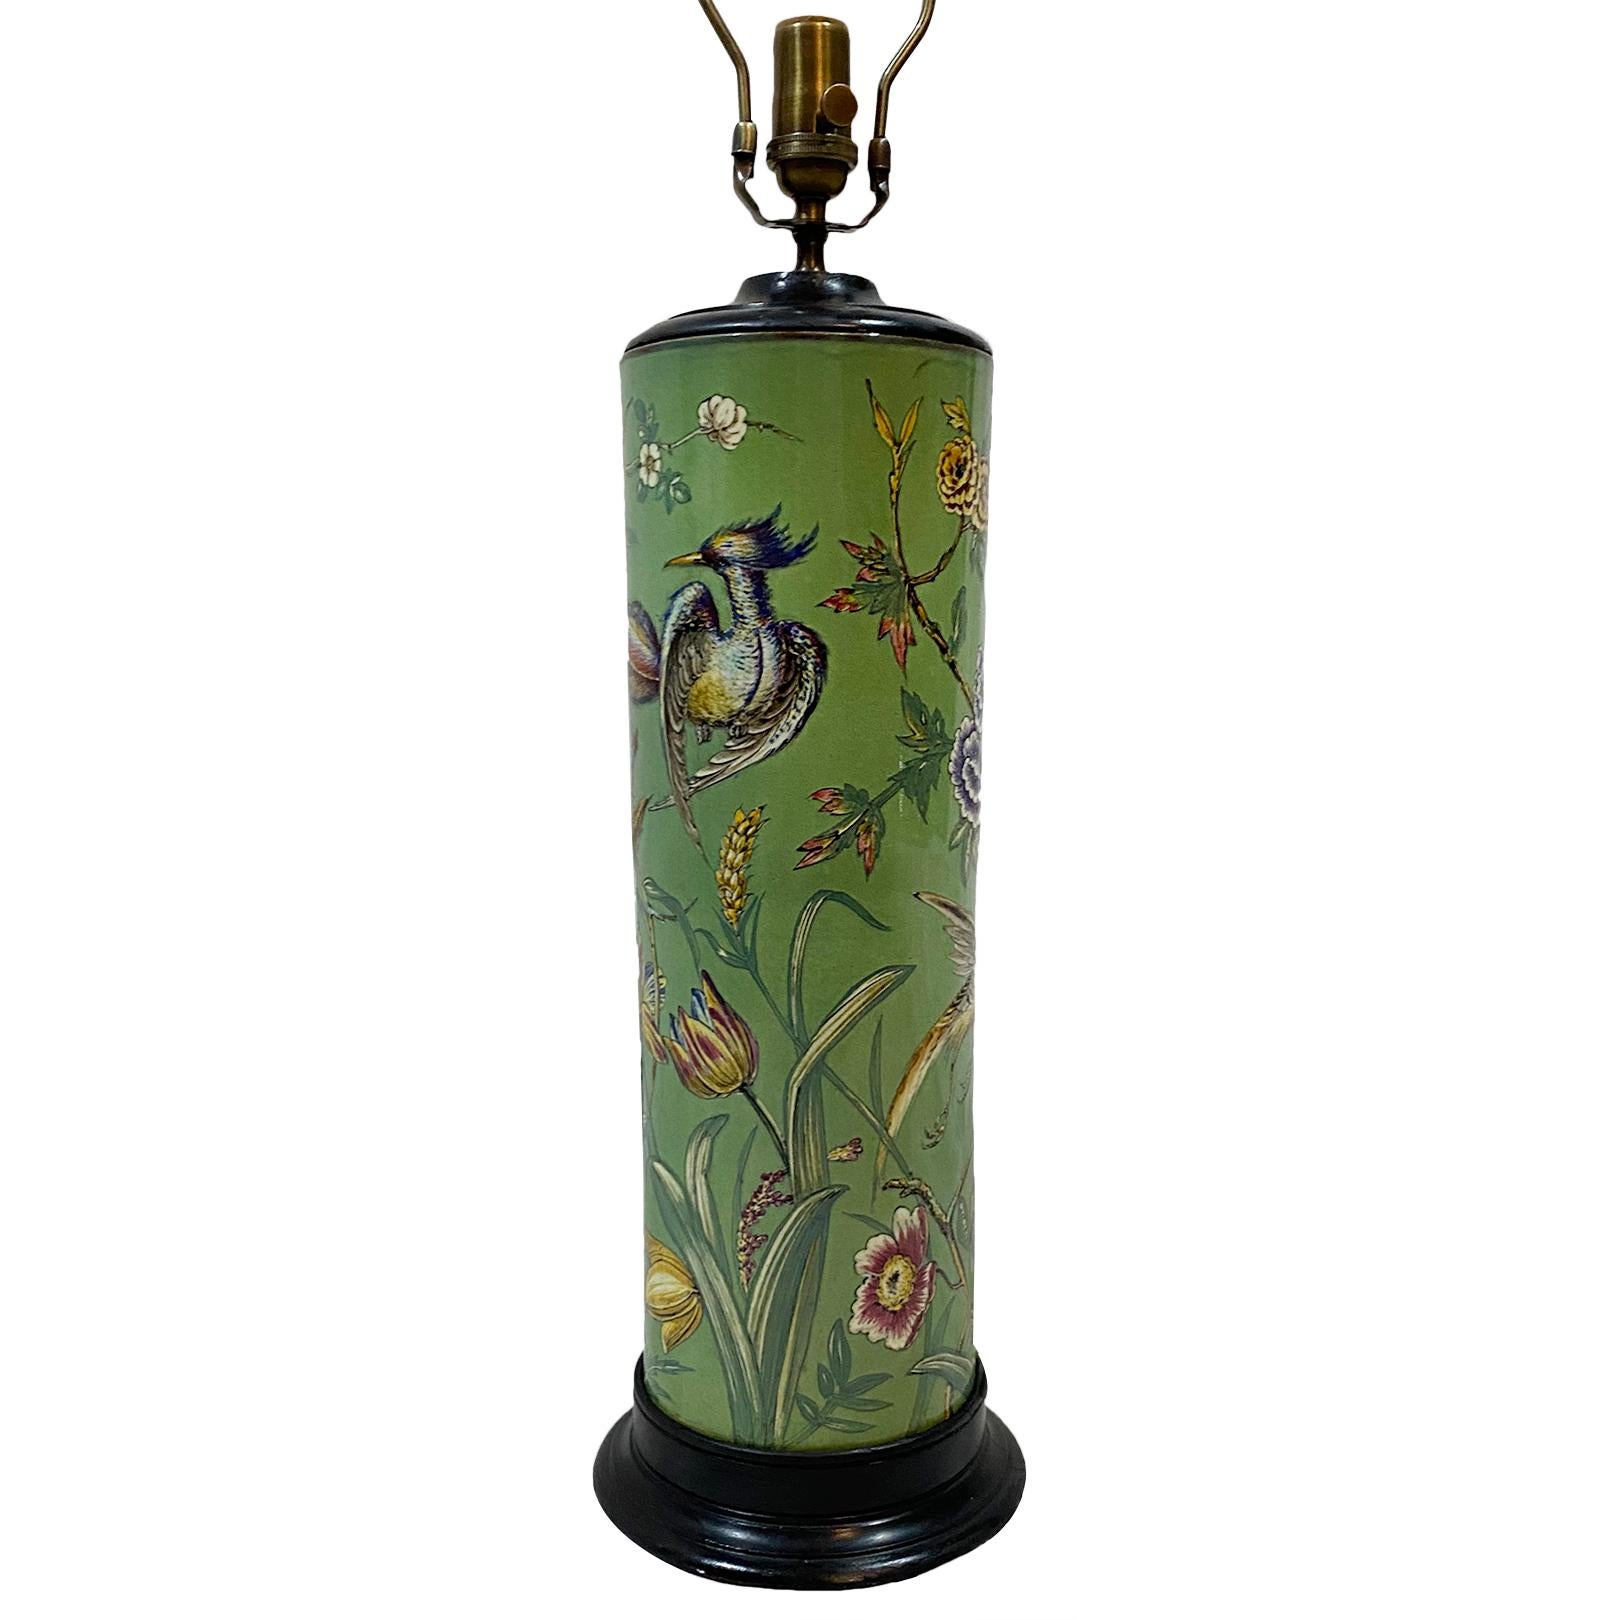 An antique circa 1950's English glazed green porcelain table lamp with hand-painted floral and bird decoration.

Measurements:
Height of body: 21.5